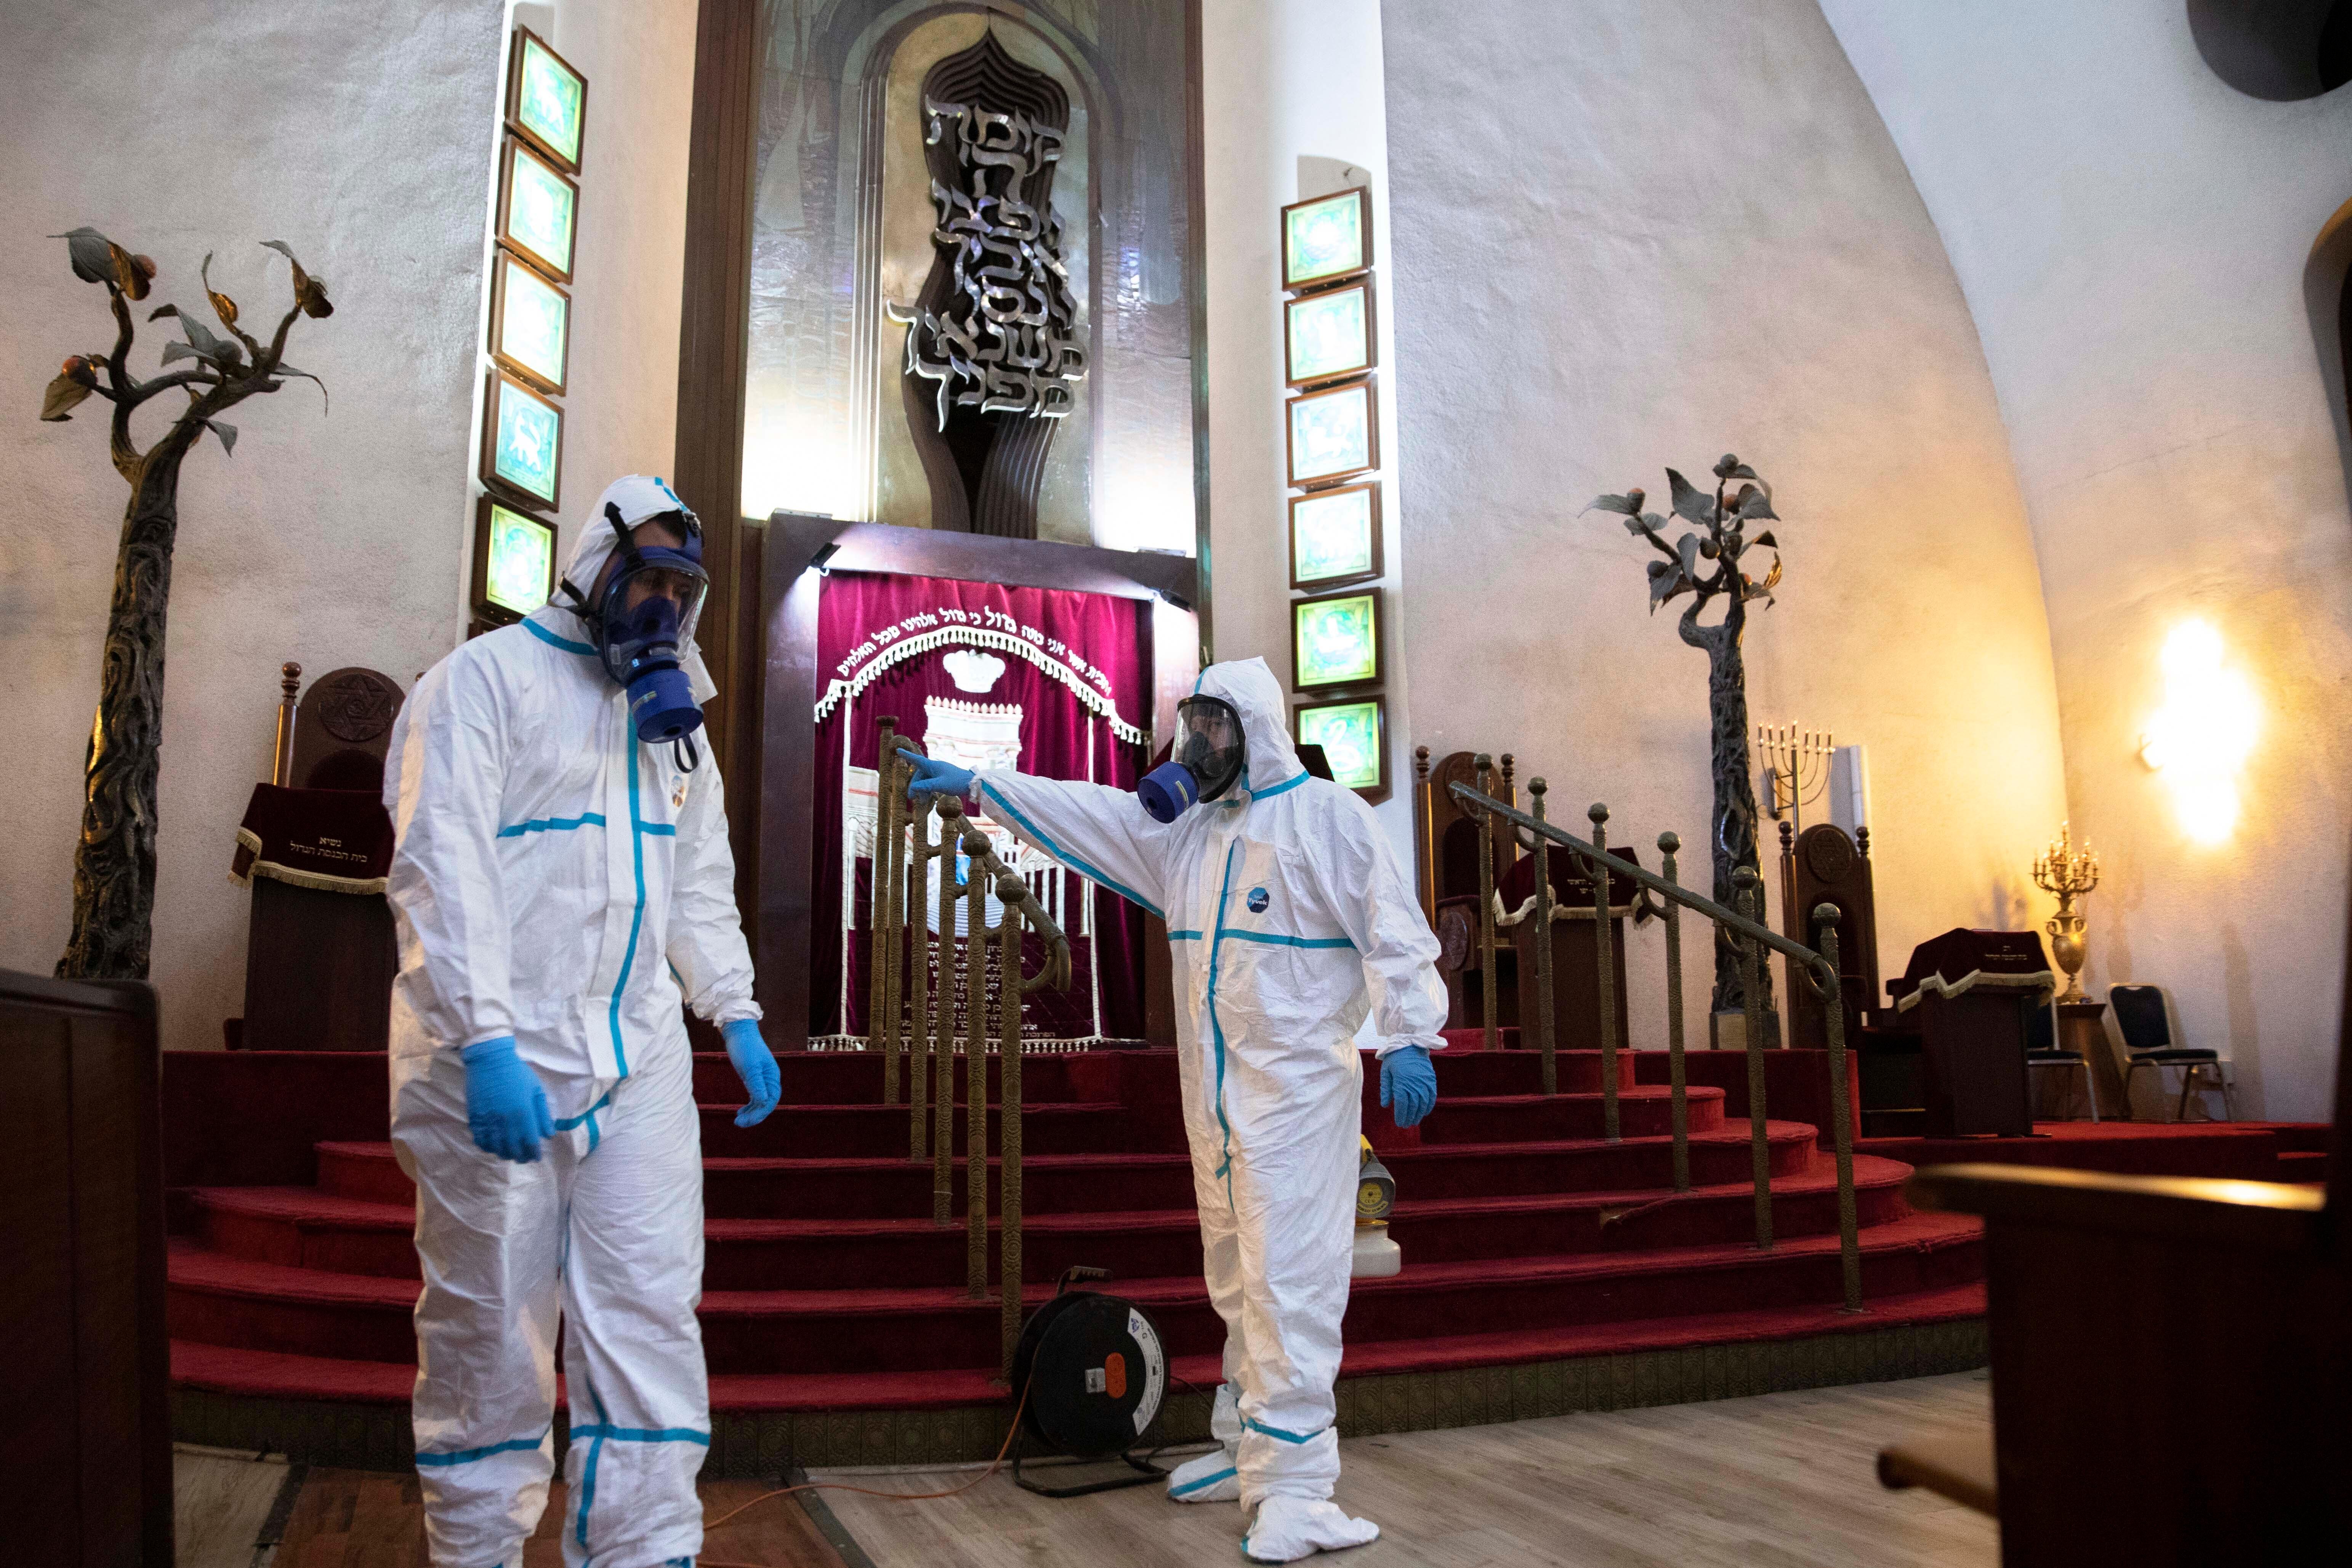 Workers sprays disinfectant as a precaution against the coronavirus at the Great Synagogue in Tel Aviv, Israel, Tuesday, March 17, 2020. The head of Israel's shadowy Shin Bet internal security service said Tuesday that his agency received Cabinet approval overnight to start deploying its counter-terrorism tech measures to help curb the spread of the new coronavirus in Israel. For most people, the virus causes only mild or moderate symptoms. For some it can cause more severe illness. (AP Photo/Sebastian Scheiner)